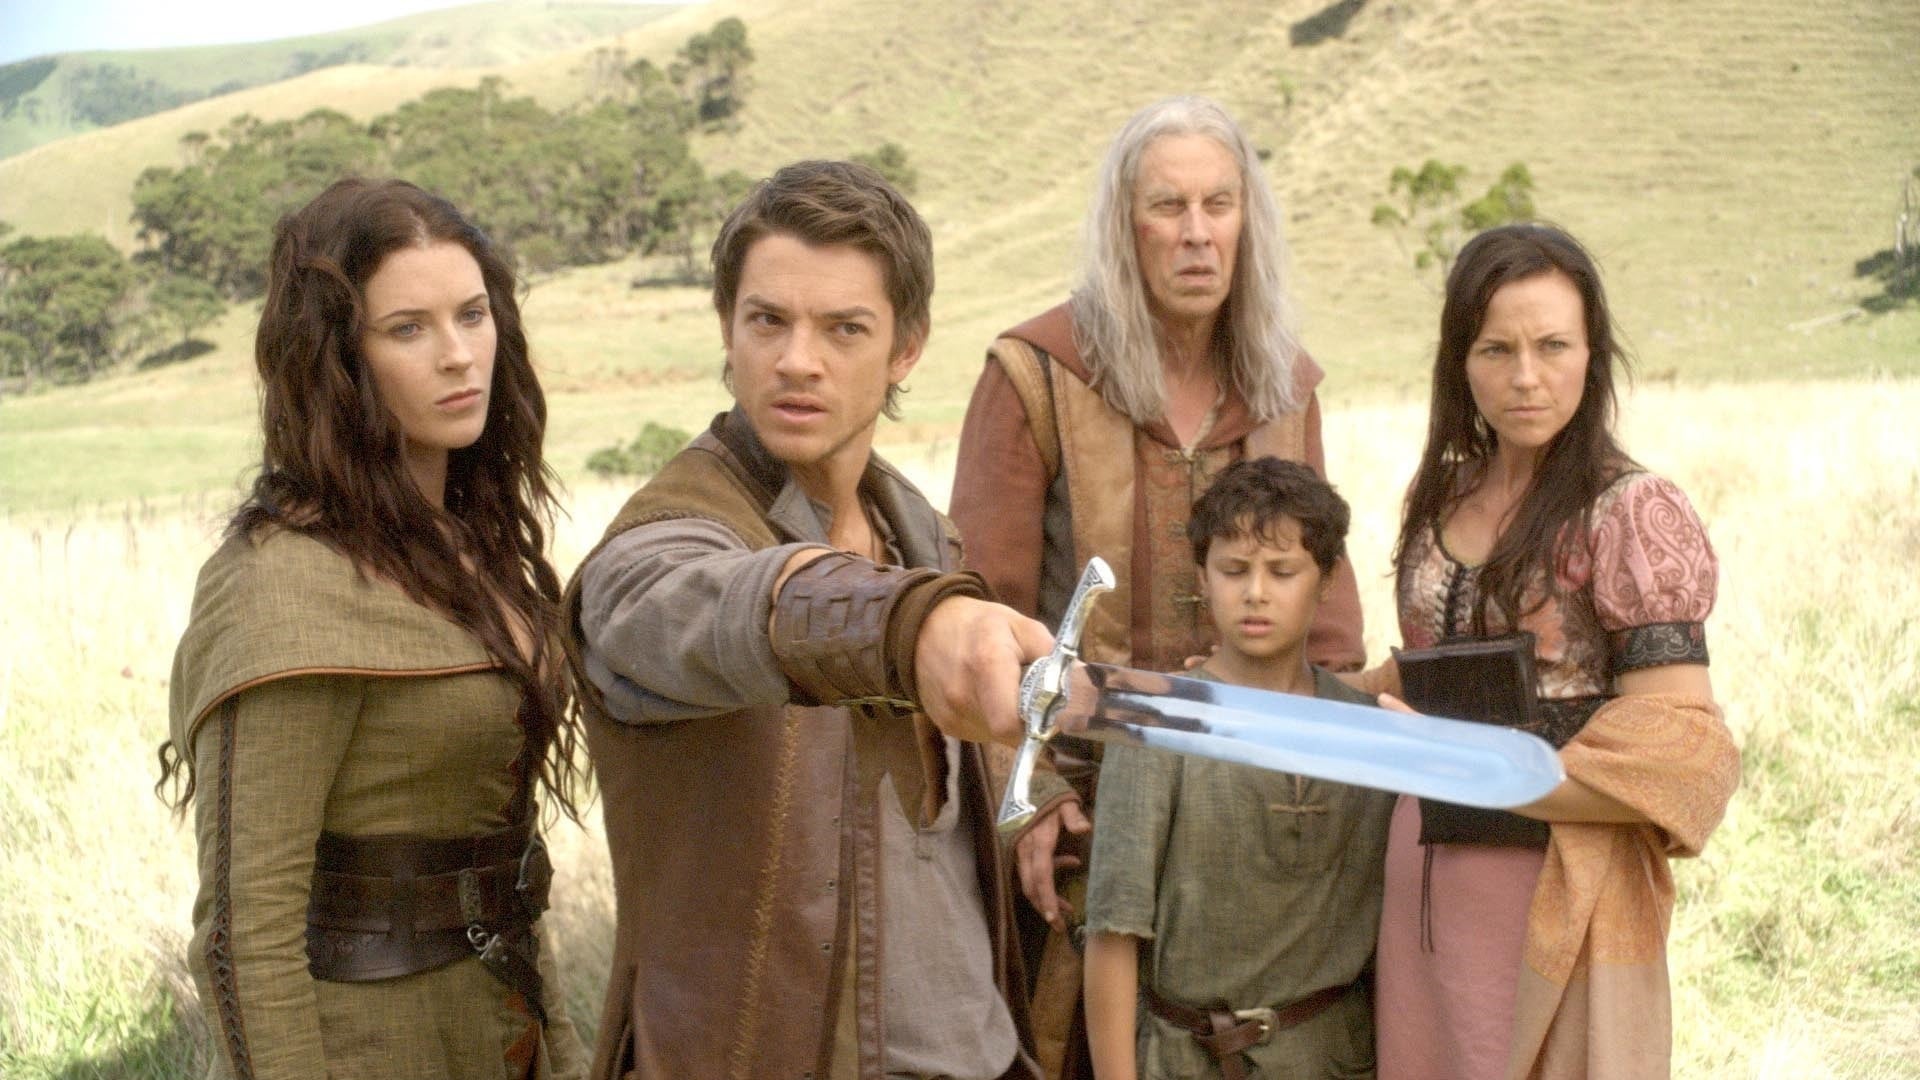 Legend of the Seeker (TV Series): Bruce Spence as Zeddicus Zul Zorander with the main protagonists. 1920x1080 Full HD Background.